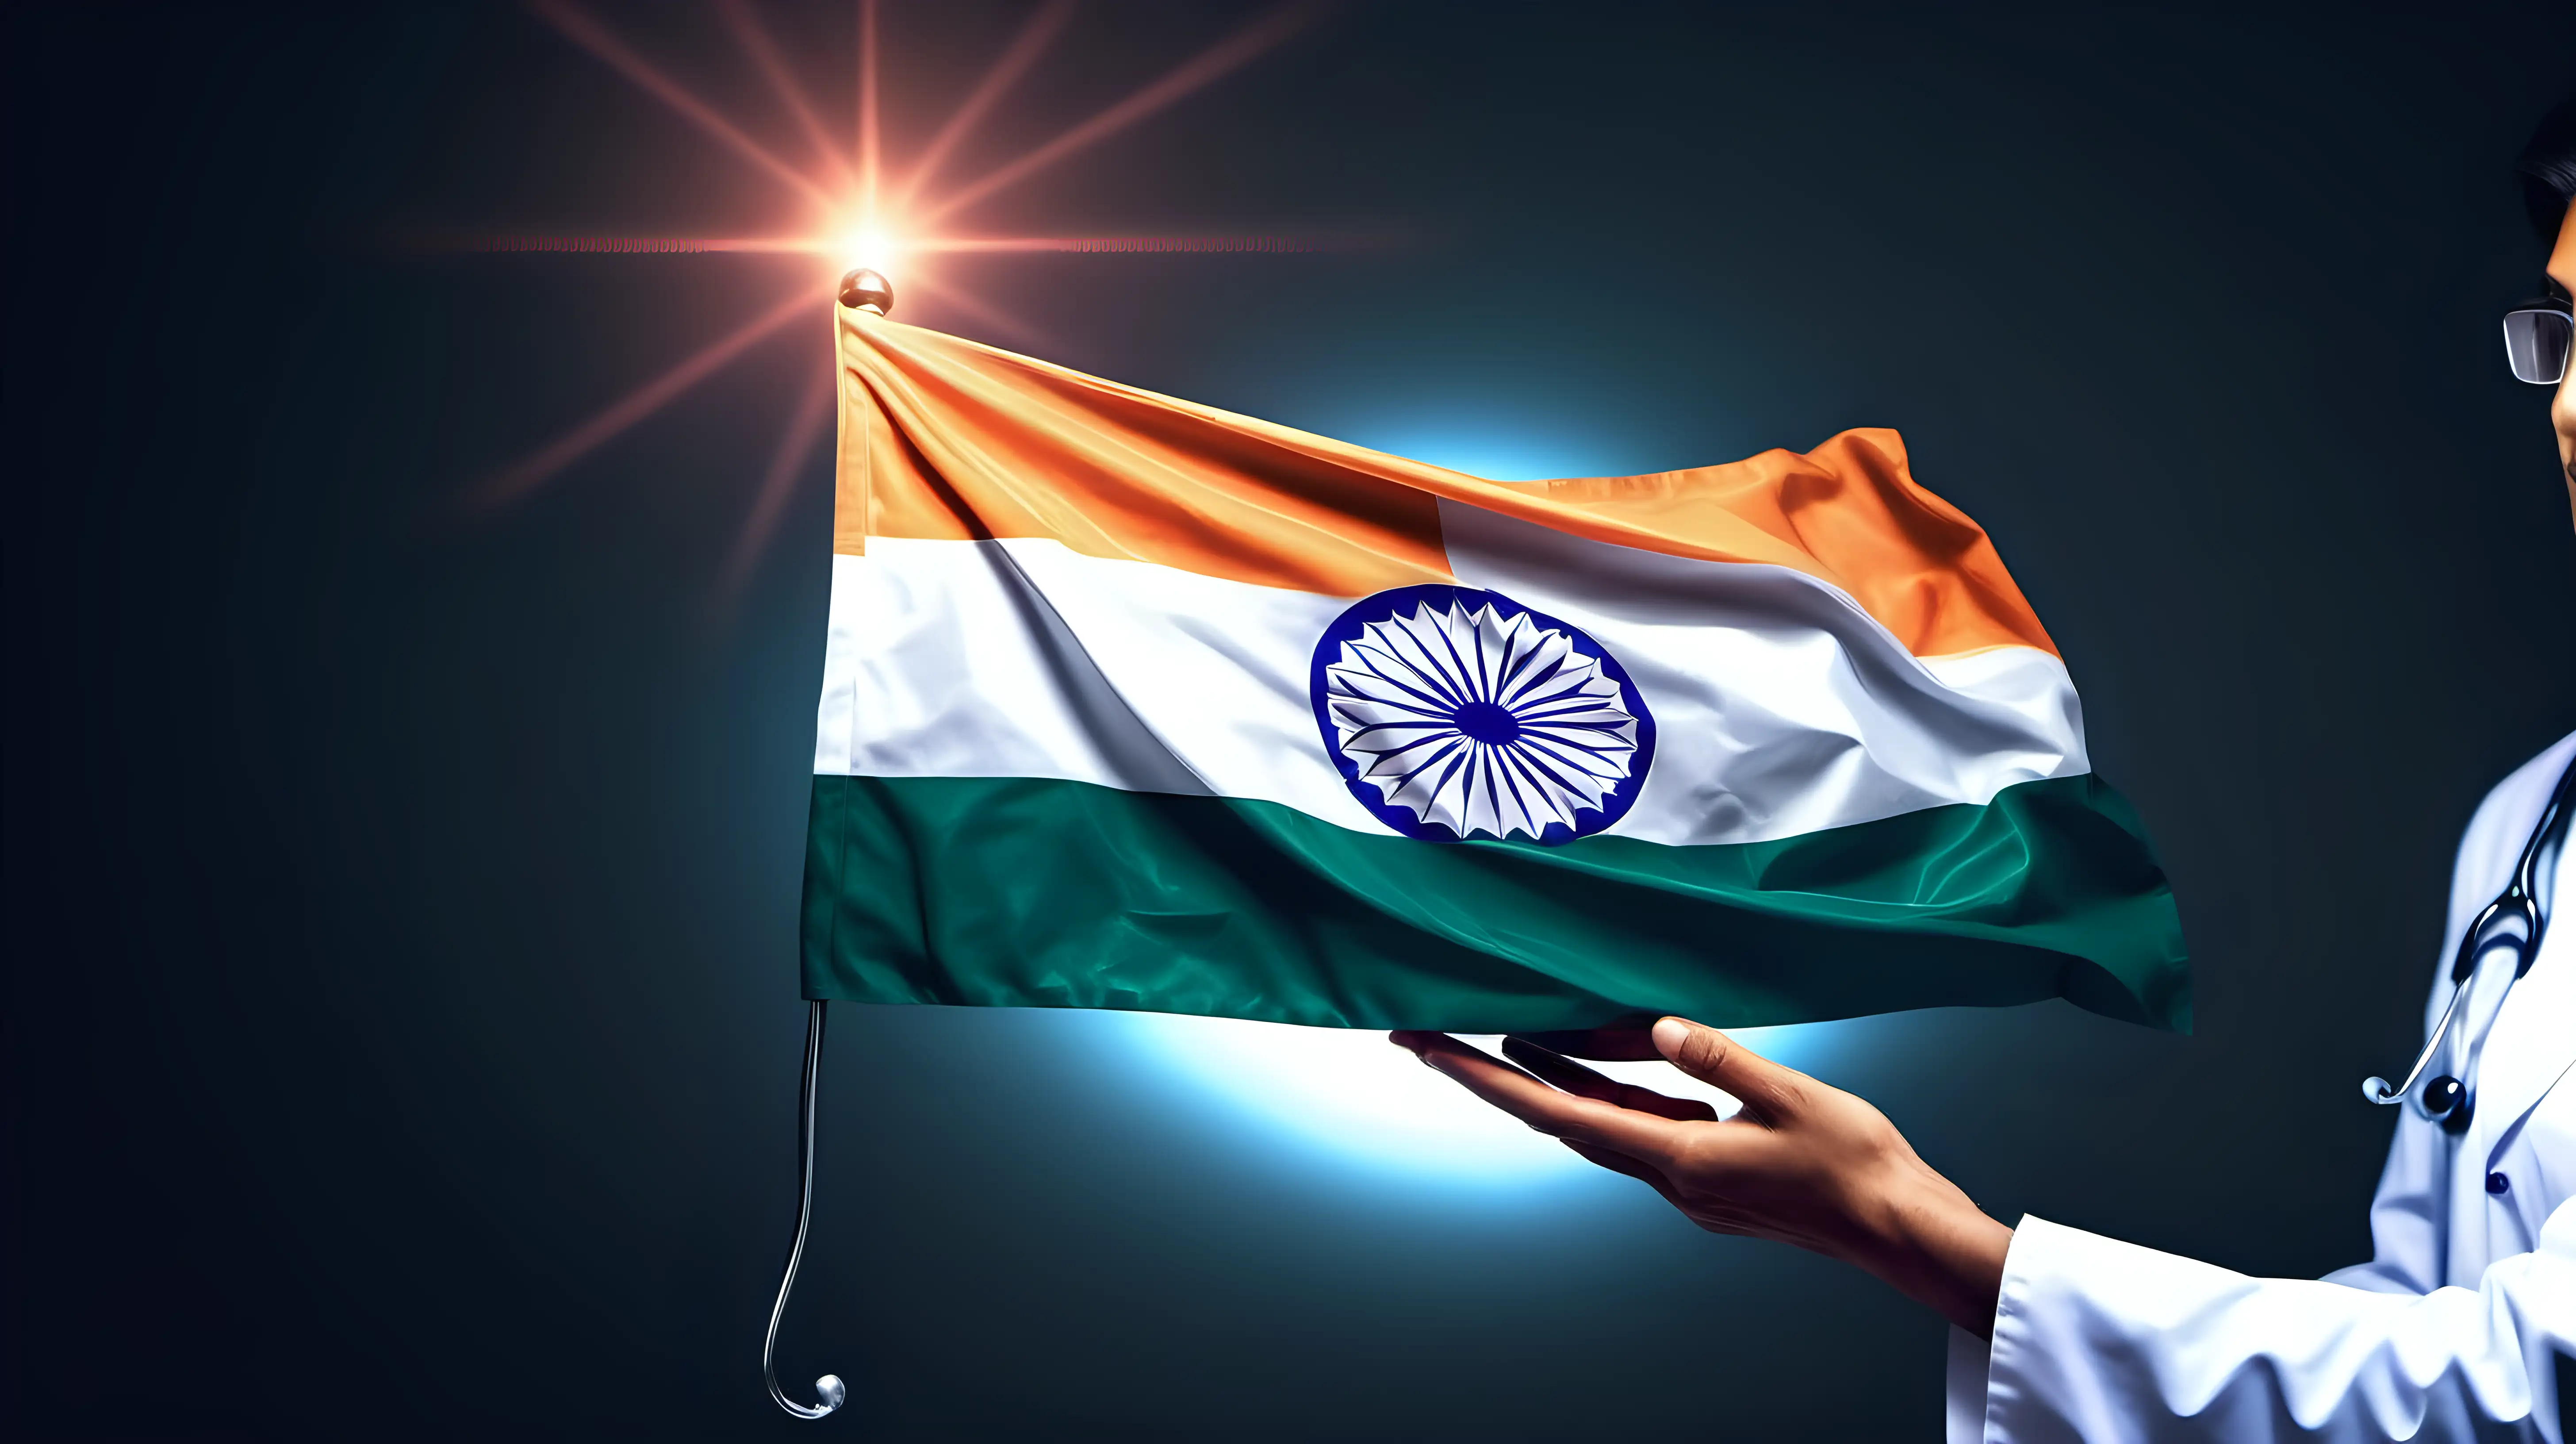 Dedicated Doctor Providing Medical Care with Glowing Indian Flag